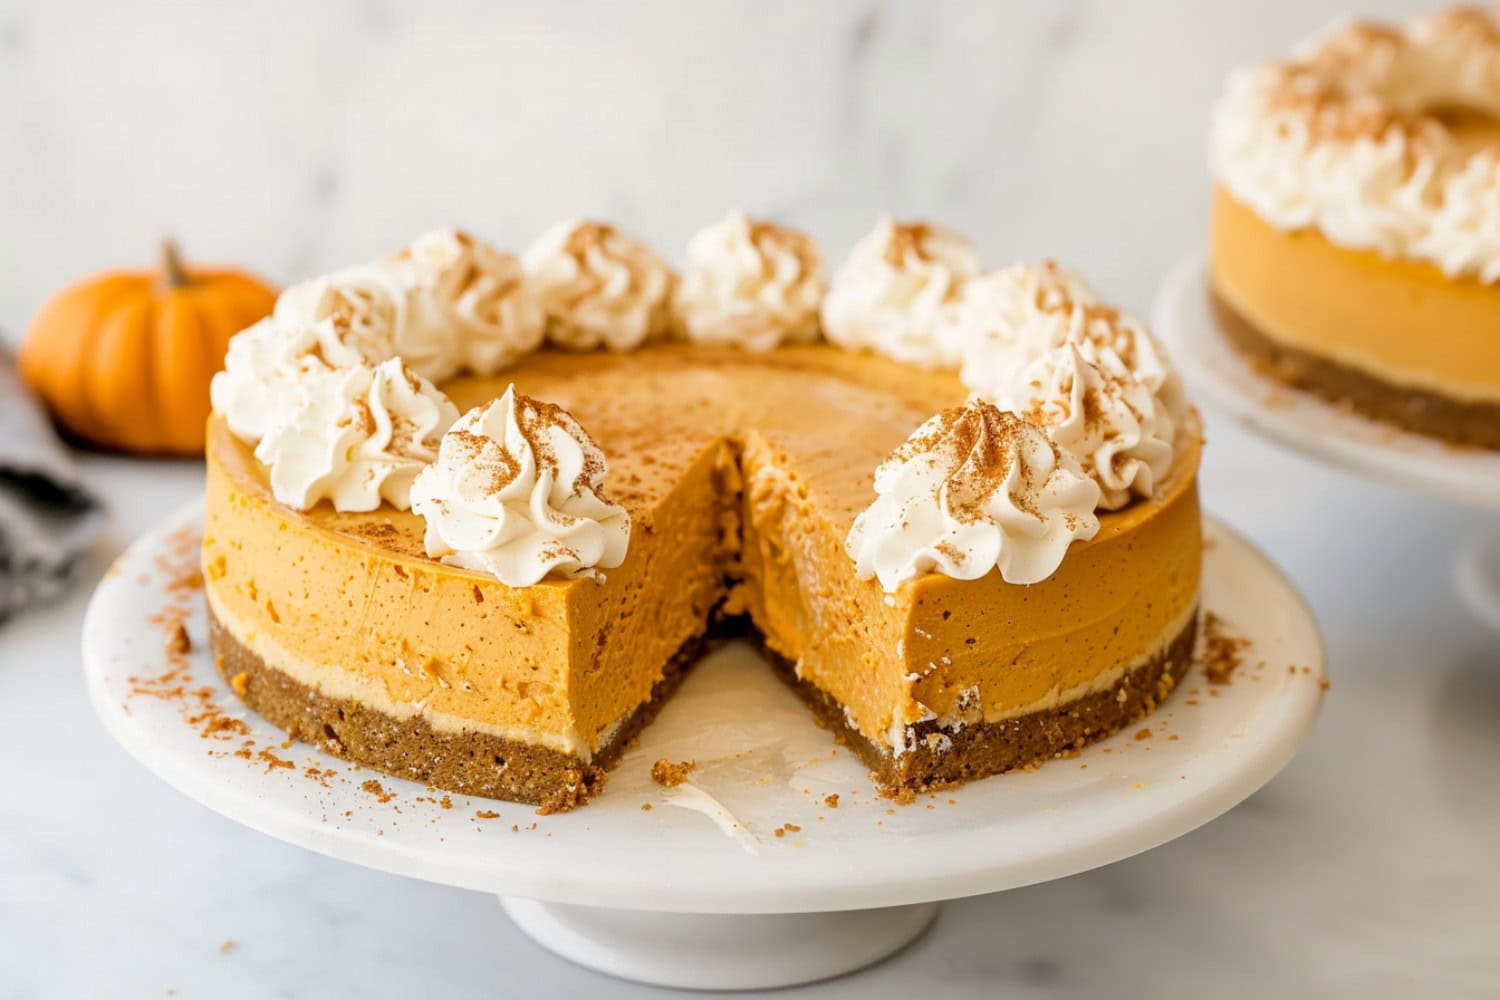 Mouthwatering no-bake pumpkin cheesecake, with layers of creamy pumpkin filling and a crunchy crust